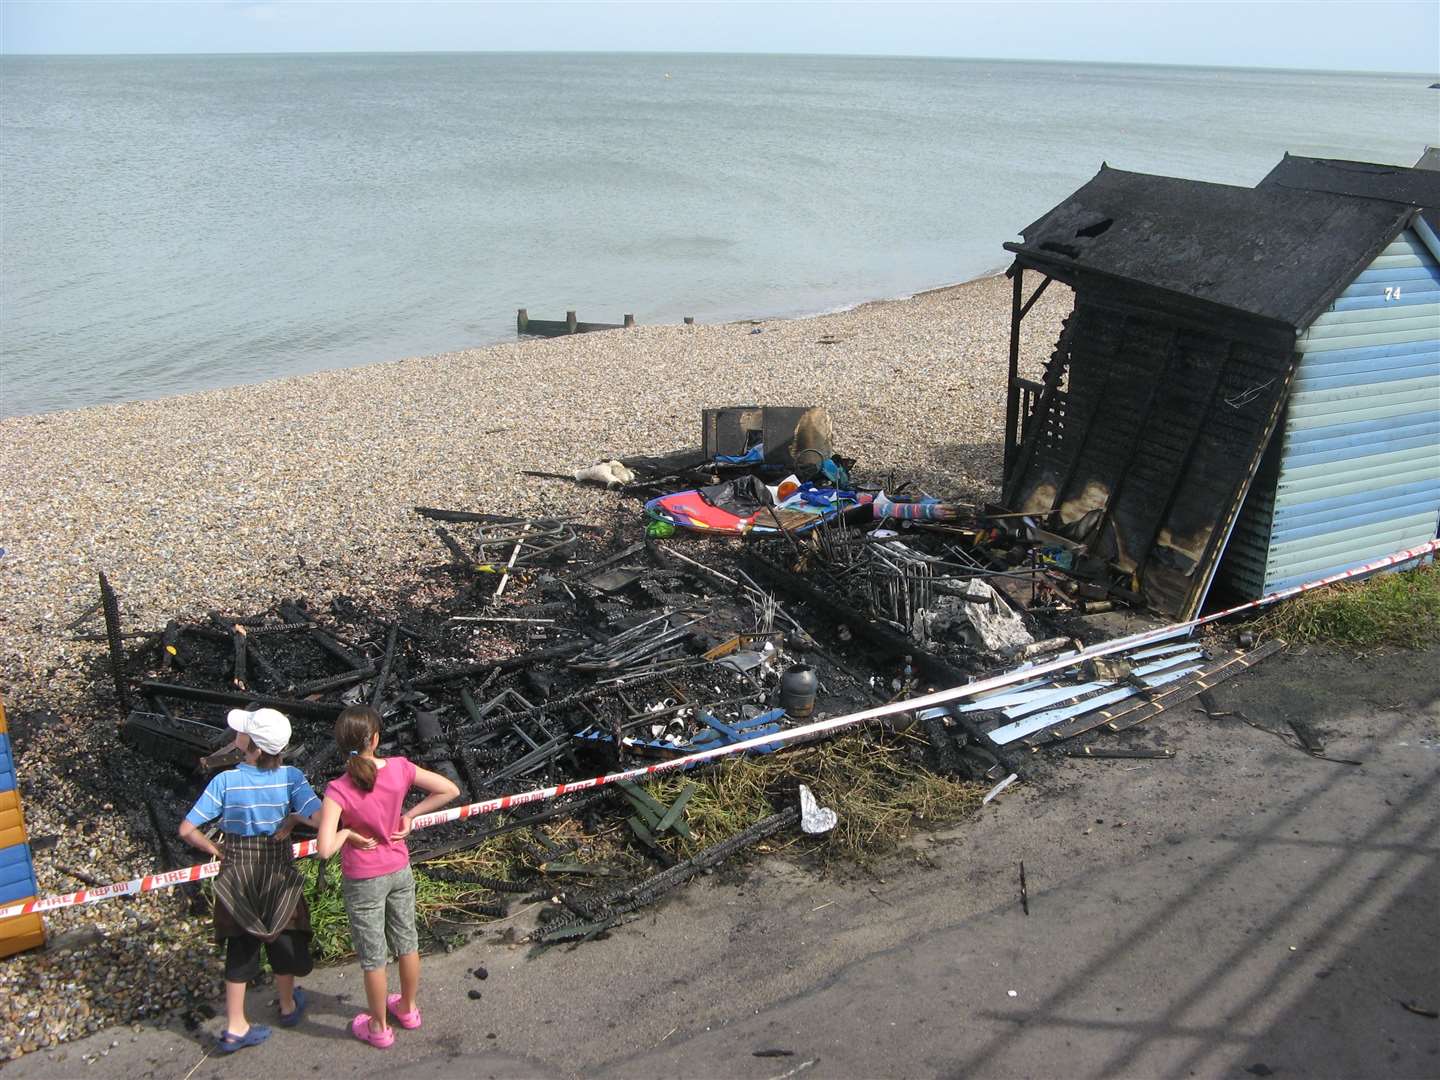 The charred remains of the beach huts which burnt down 13 years ago